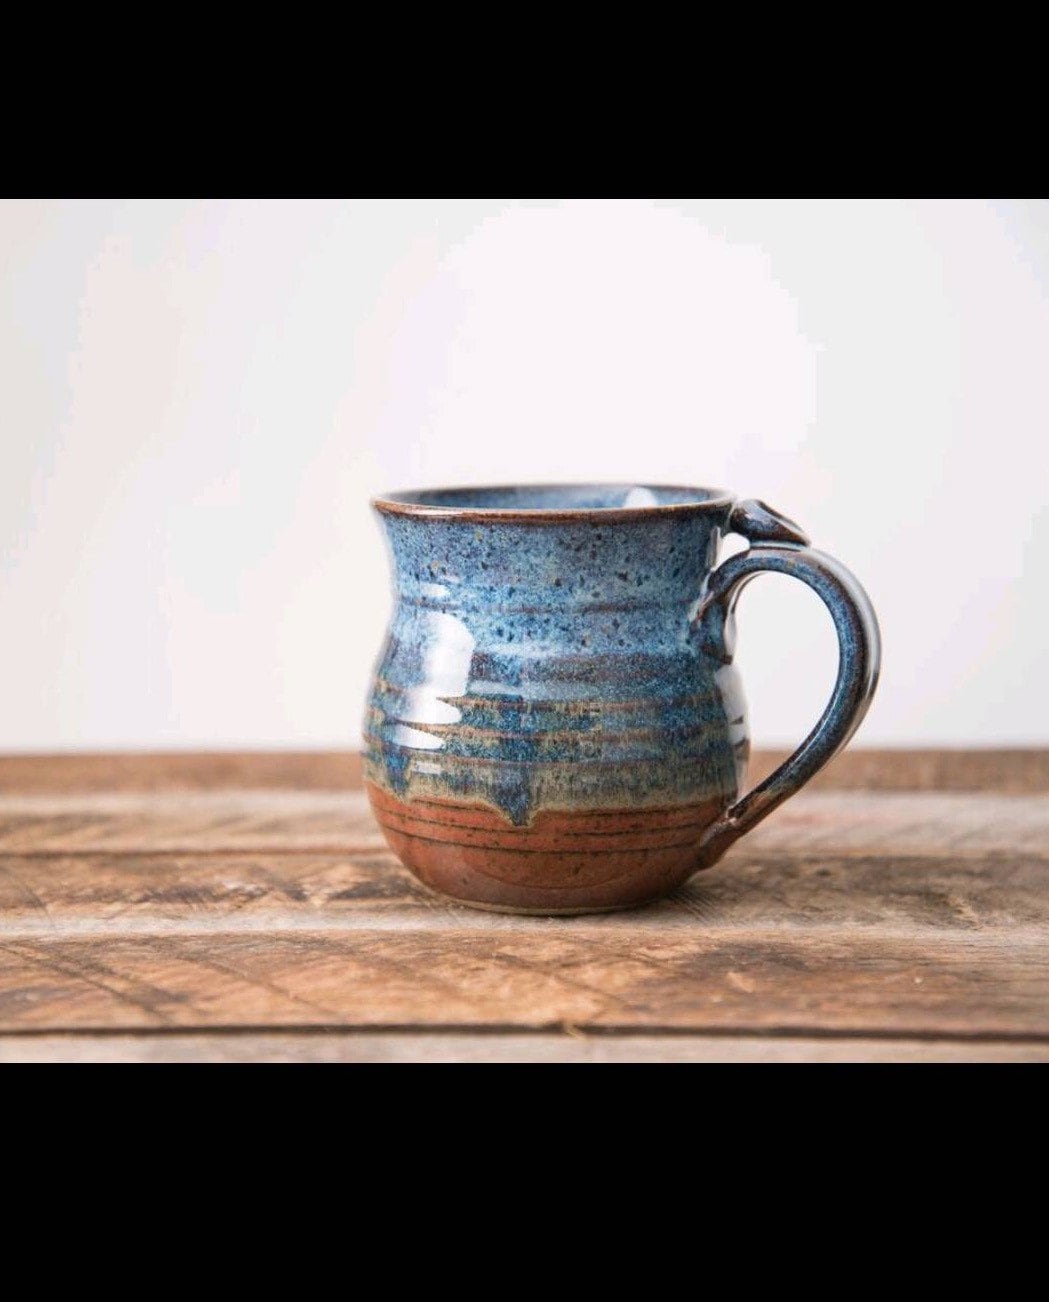 Blue and rust red hand thrown stoneware mug Clay Coffee cup thumb rest